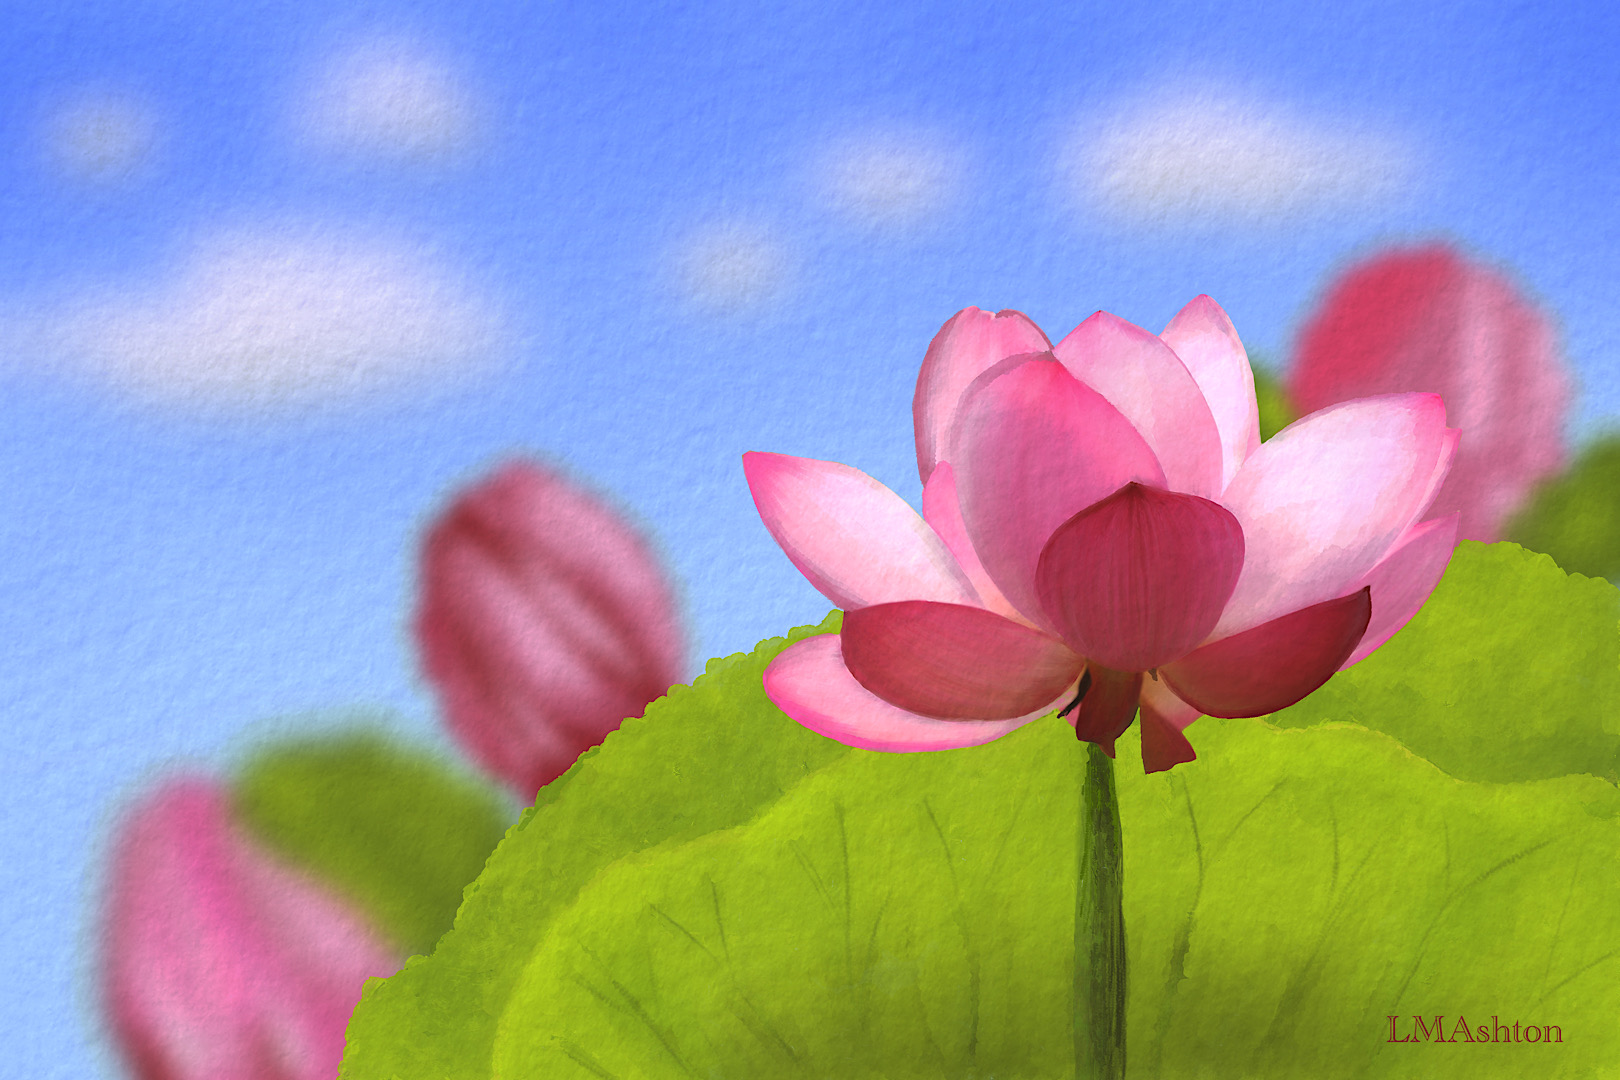 A pink lotus in the foreground, green leaves below, lotus bulbs behind the leaves, with a blue sky in the background. 